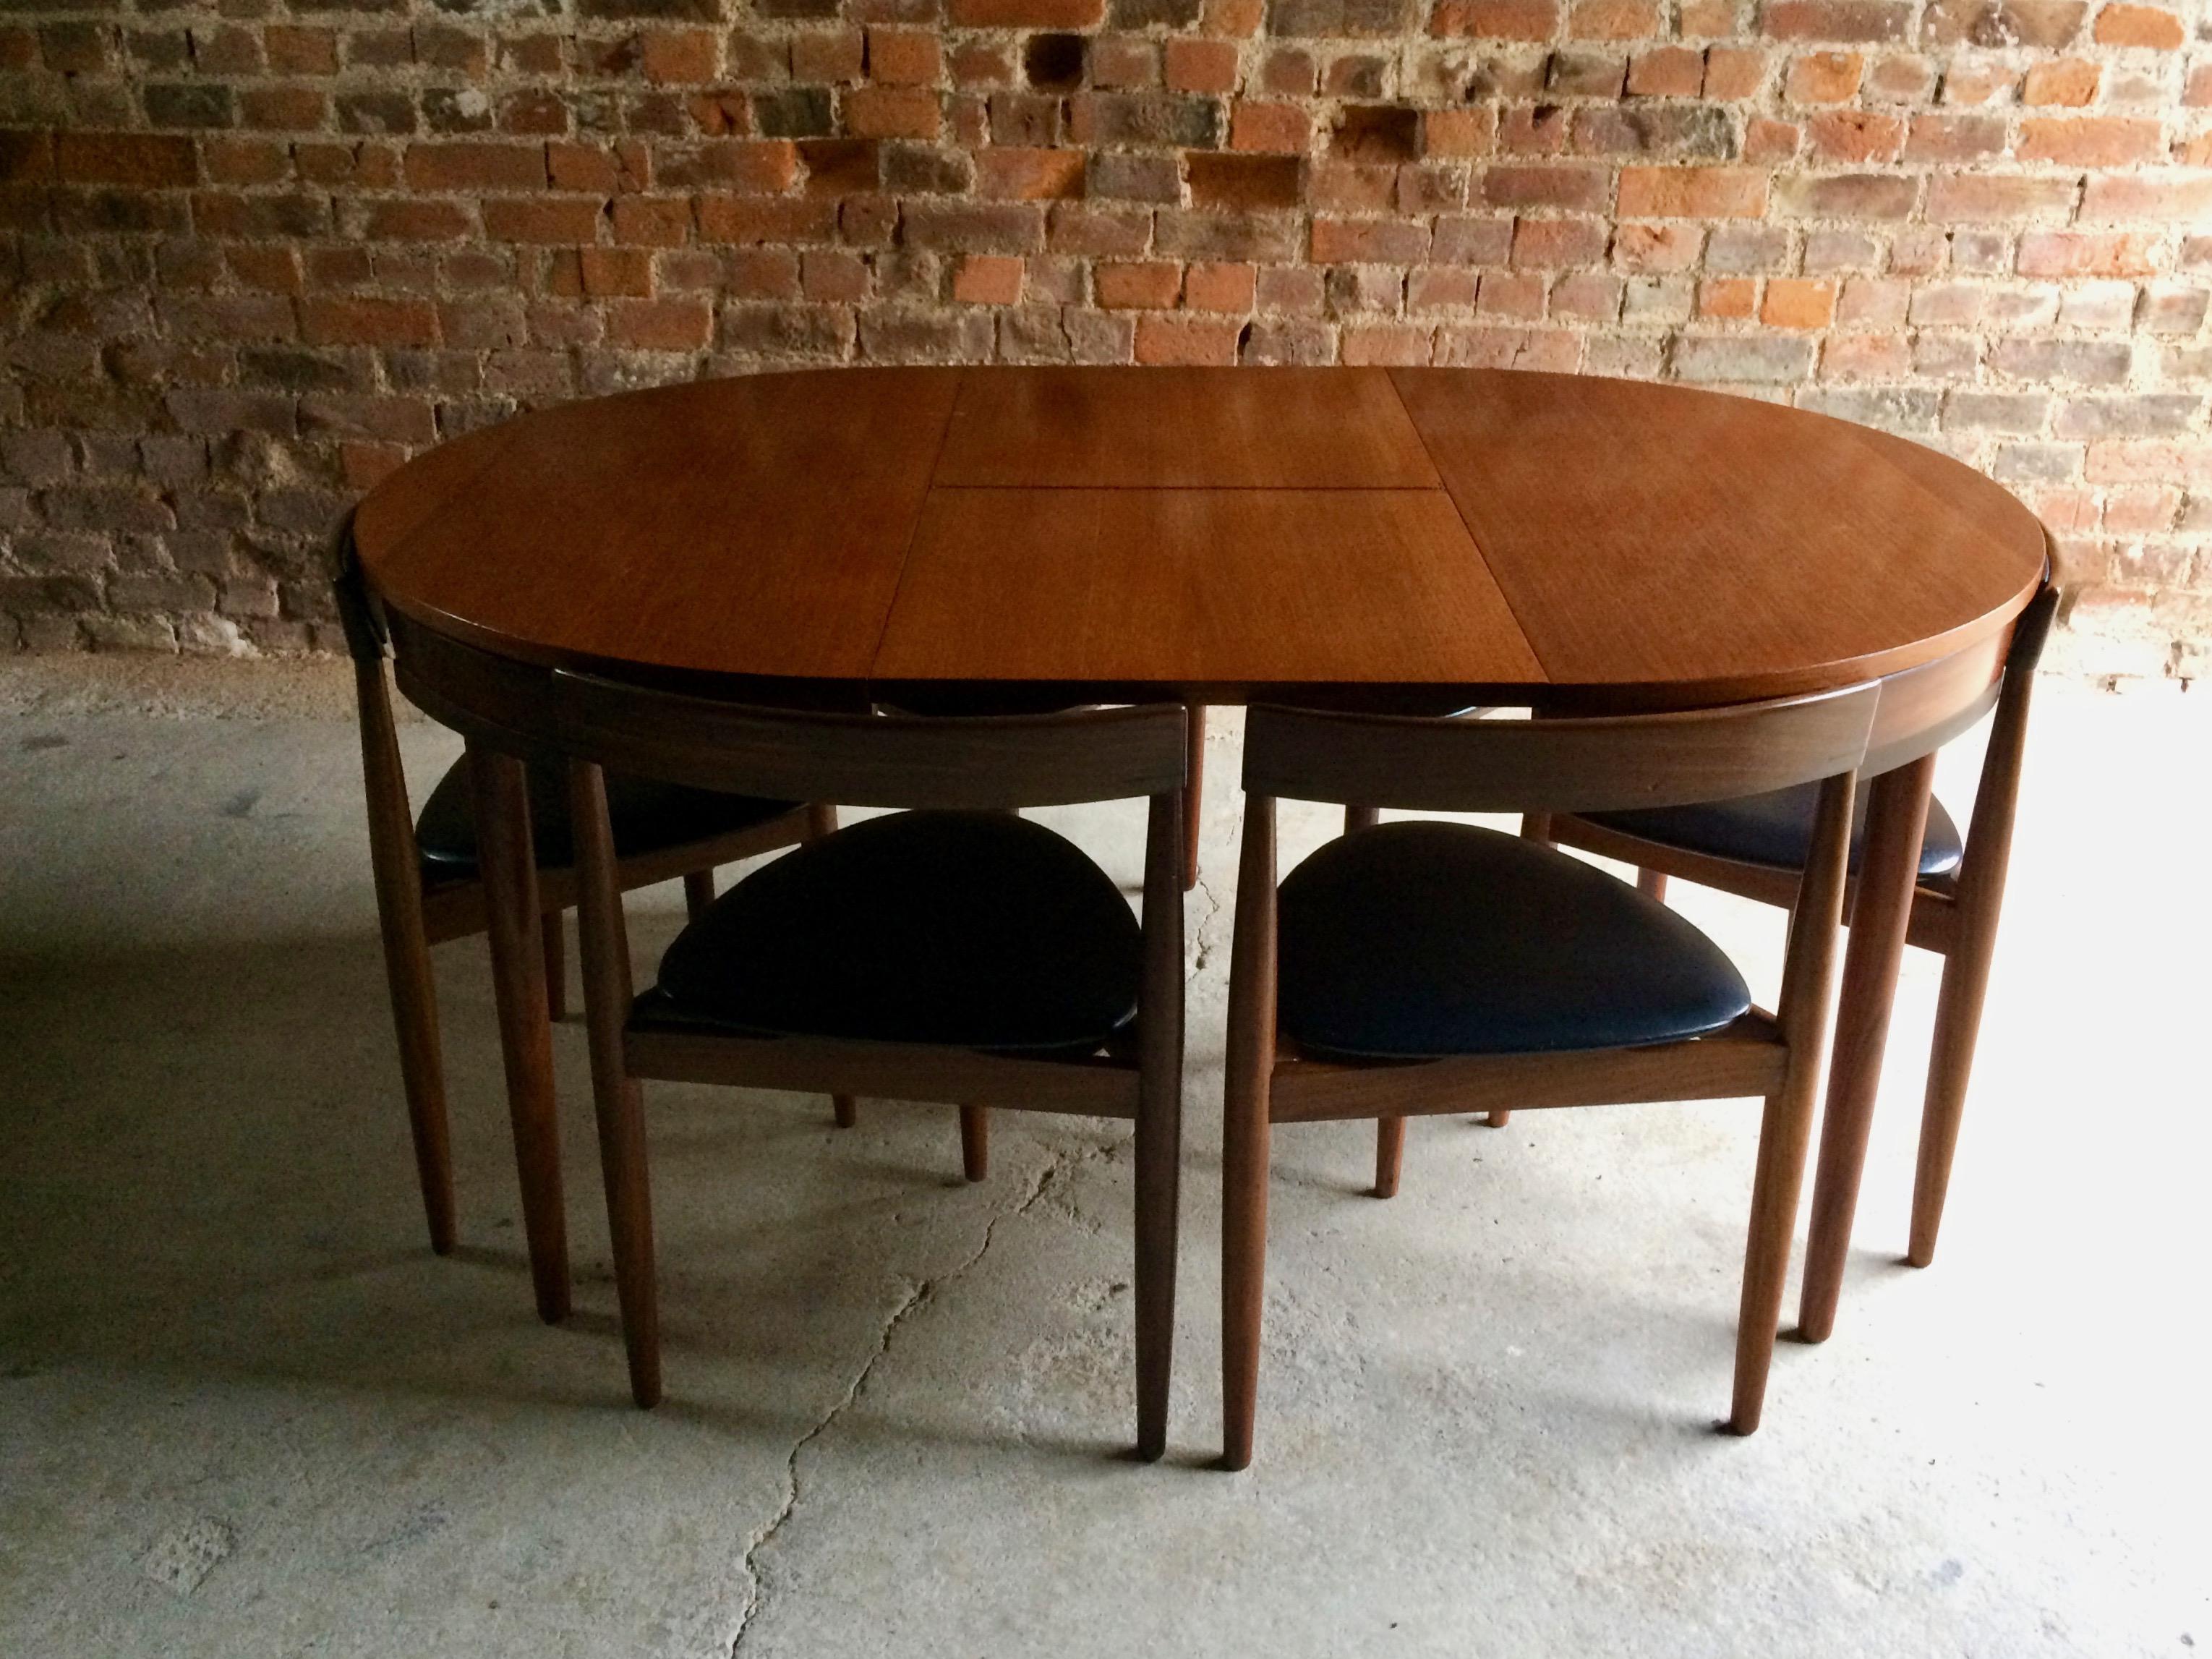 Magnificent midcentury 'Dinette' dining table designed by Hans Olsen and manufactured by Frem Rojle in Denmark during the 1950s. The table is made from teak and features an extending mechanism complete with six chairs (each chair with padded back